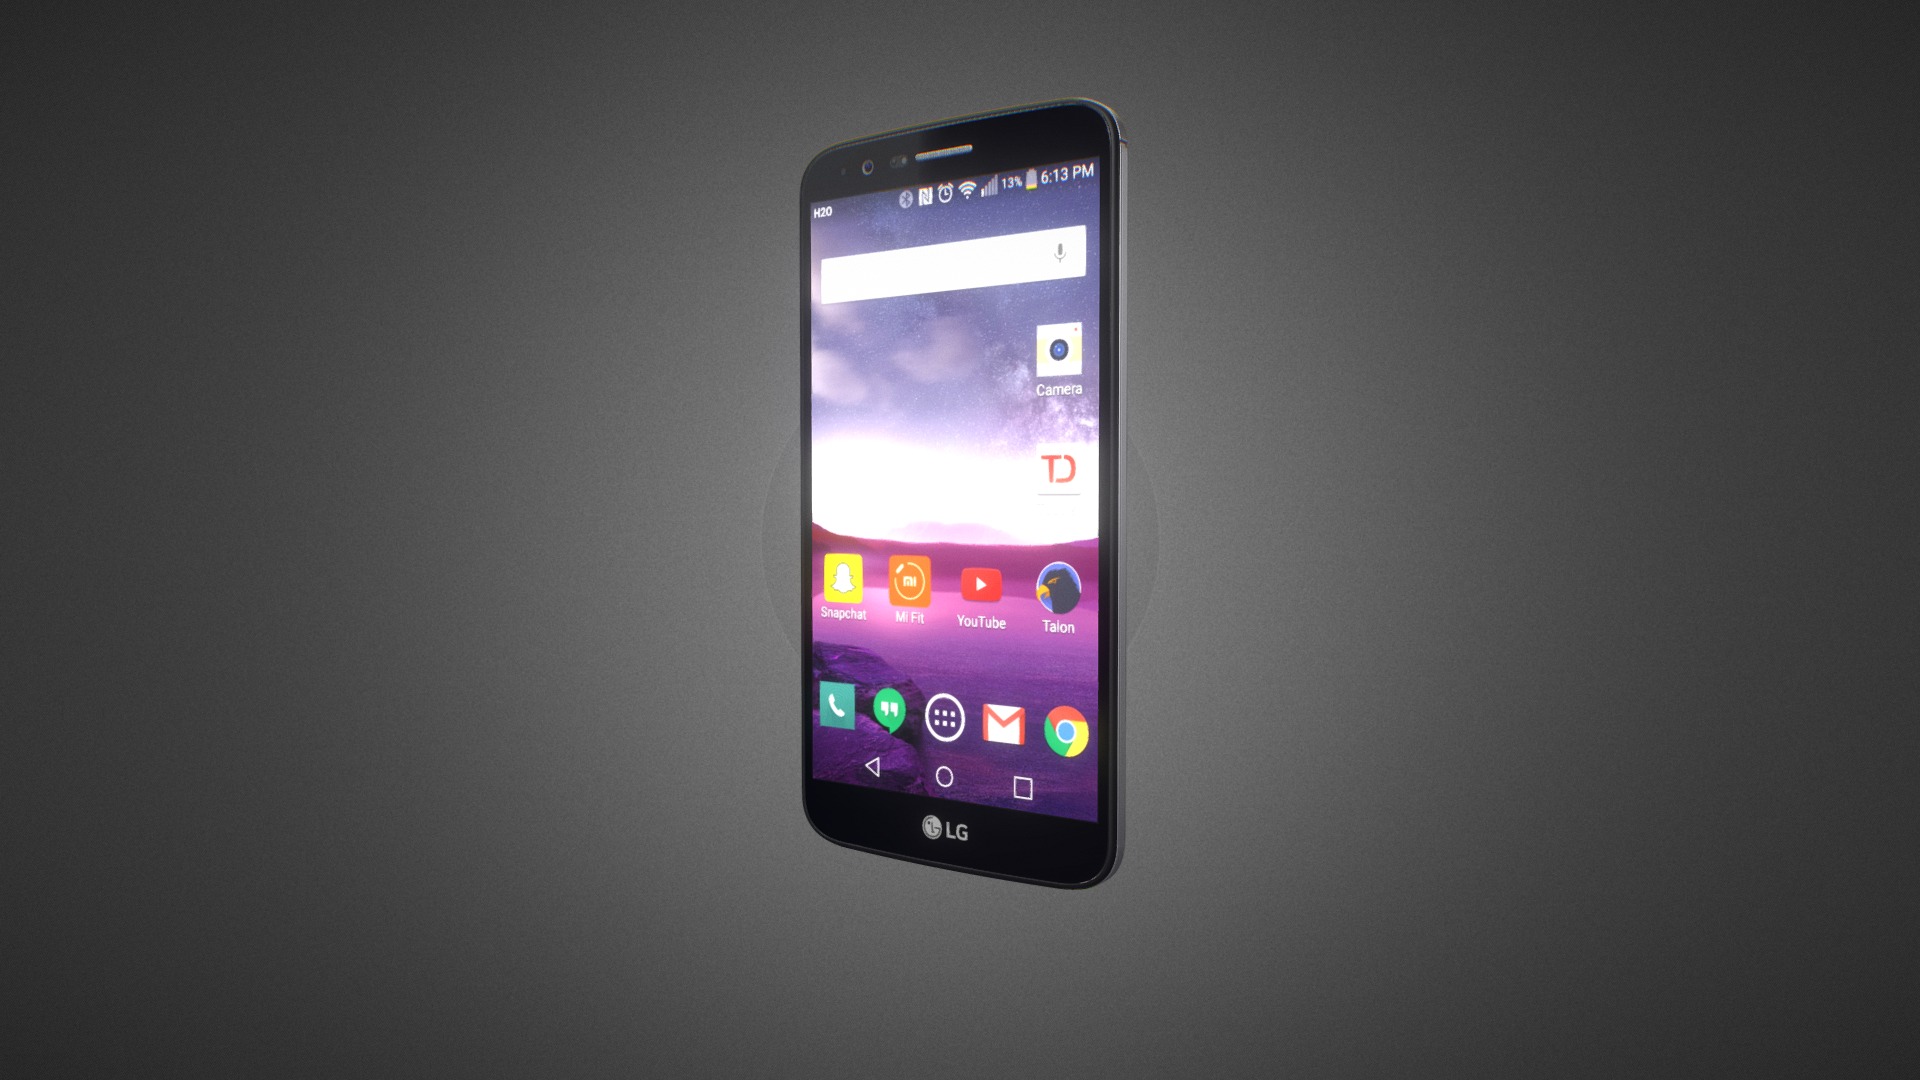 3D model LG Stylo 3 for Element 3D - This is a 3D model of the LG Stylo 3 for Element 3D. The 3D model is about a cell phone with a cracked screen.